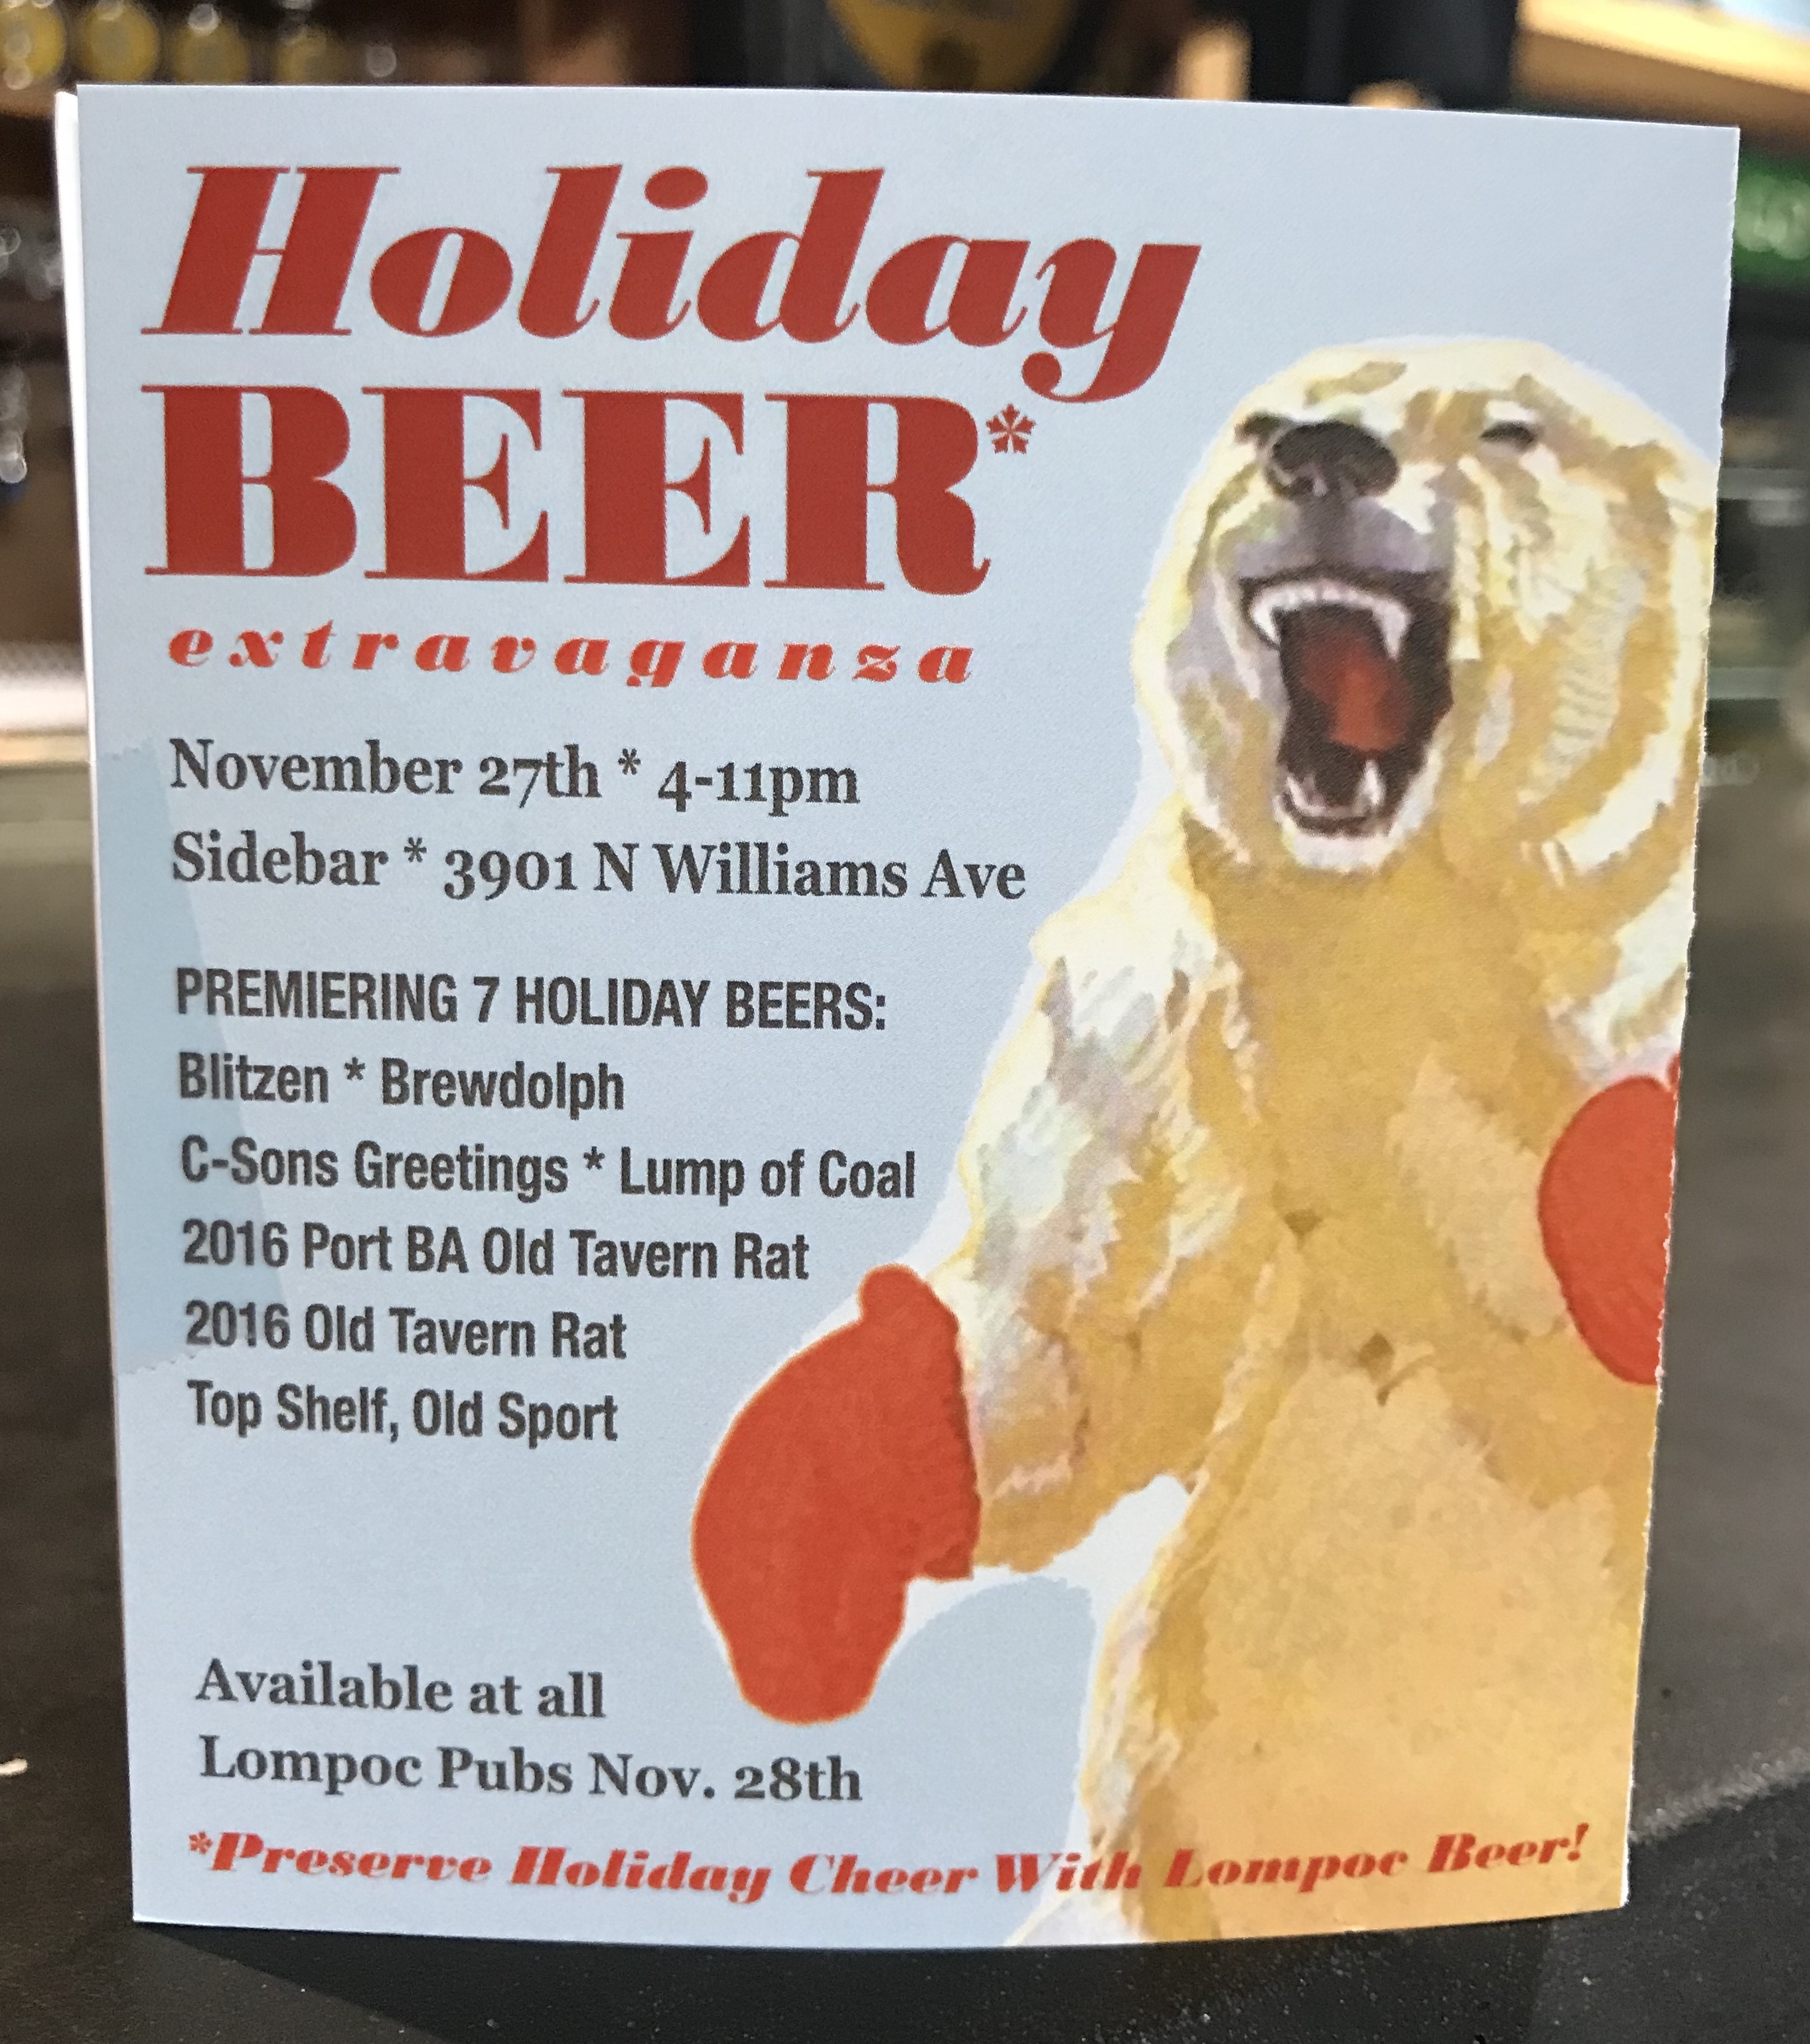 Lompoc Brewing’s Holiday Seasonal Beers for 2017 - Portland Beer Podcast Episode 51